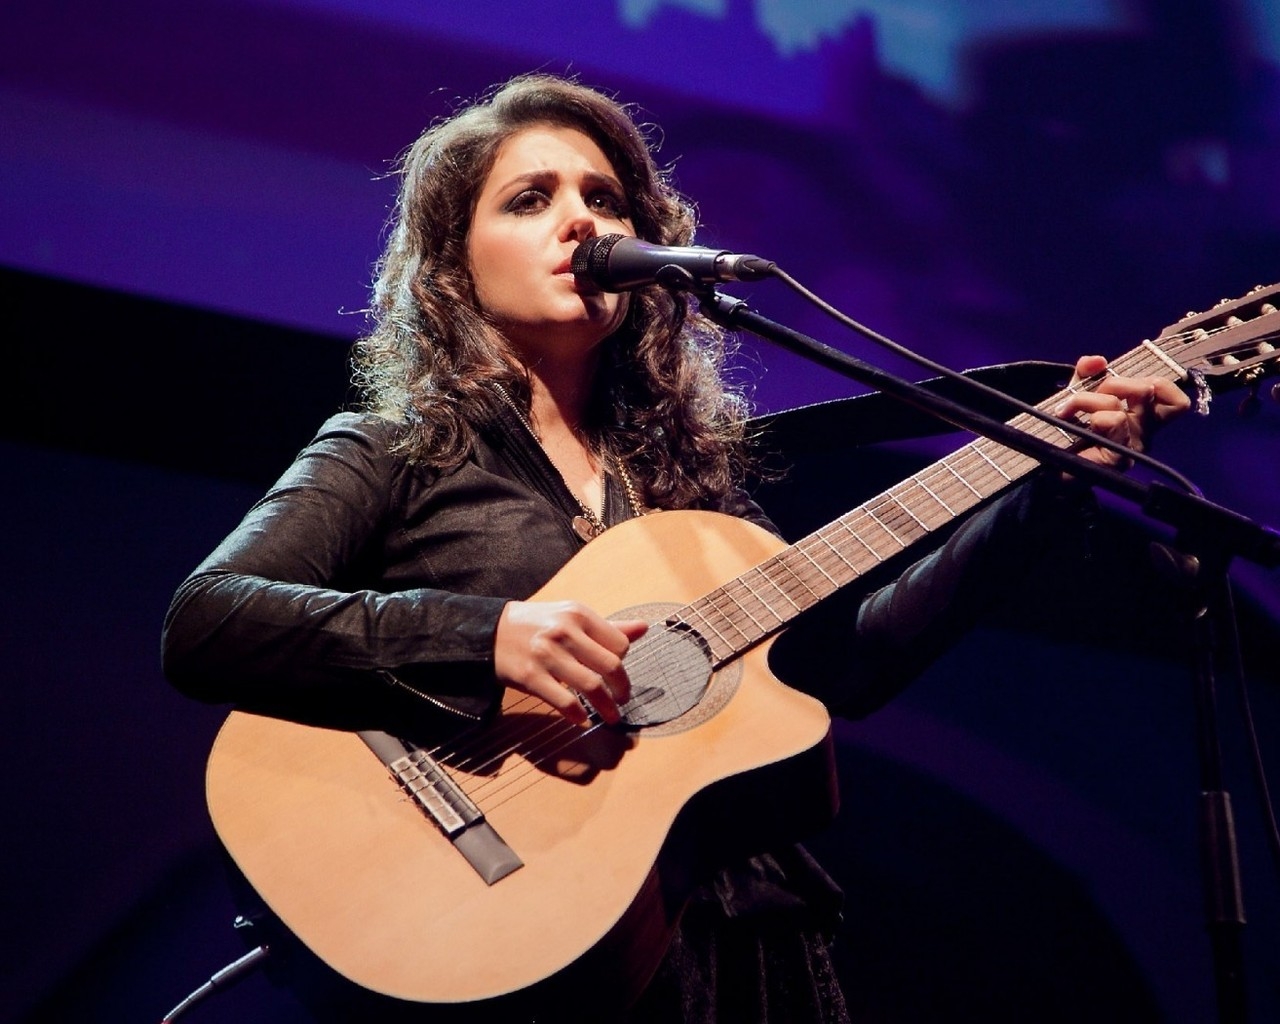 Katie Melua Performing on Stage for 1280 x 1024 resolution